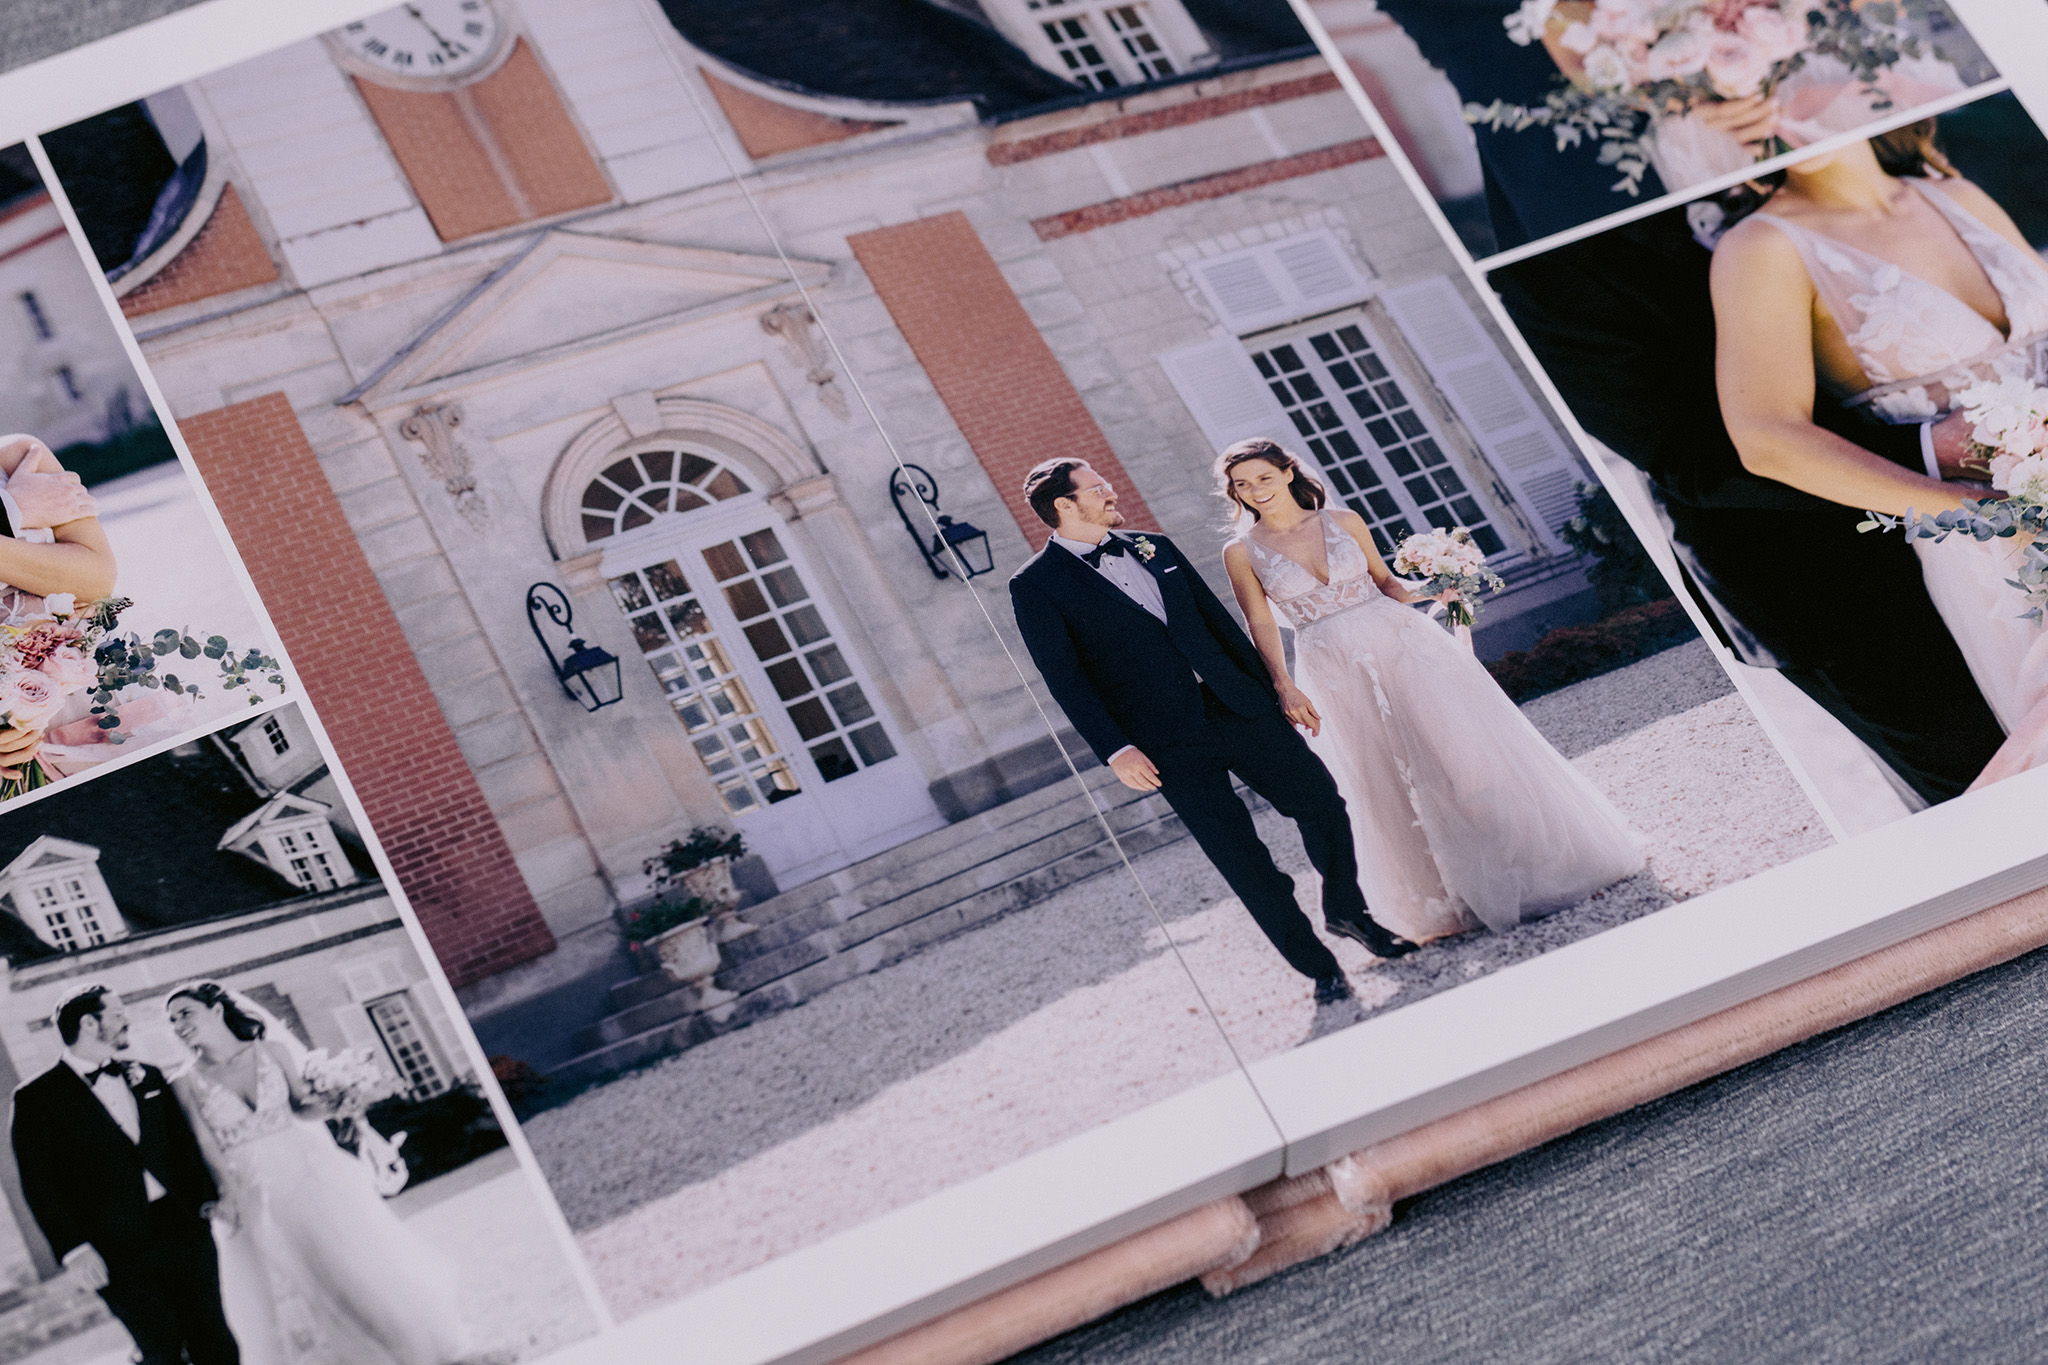 Images of a bride and groom on their wedding day printed in their wedding album